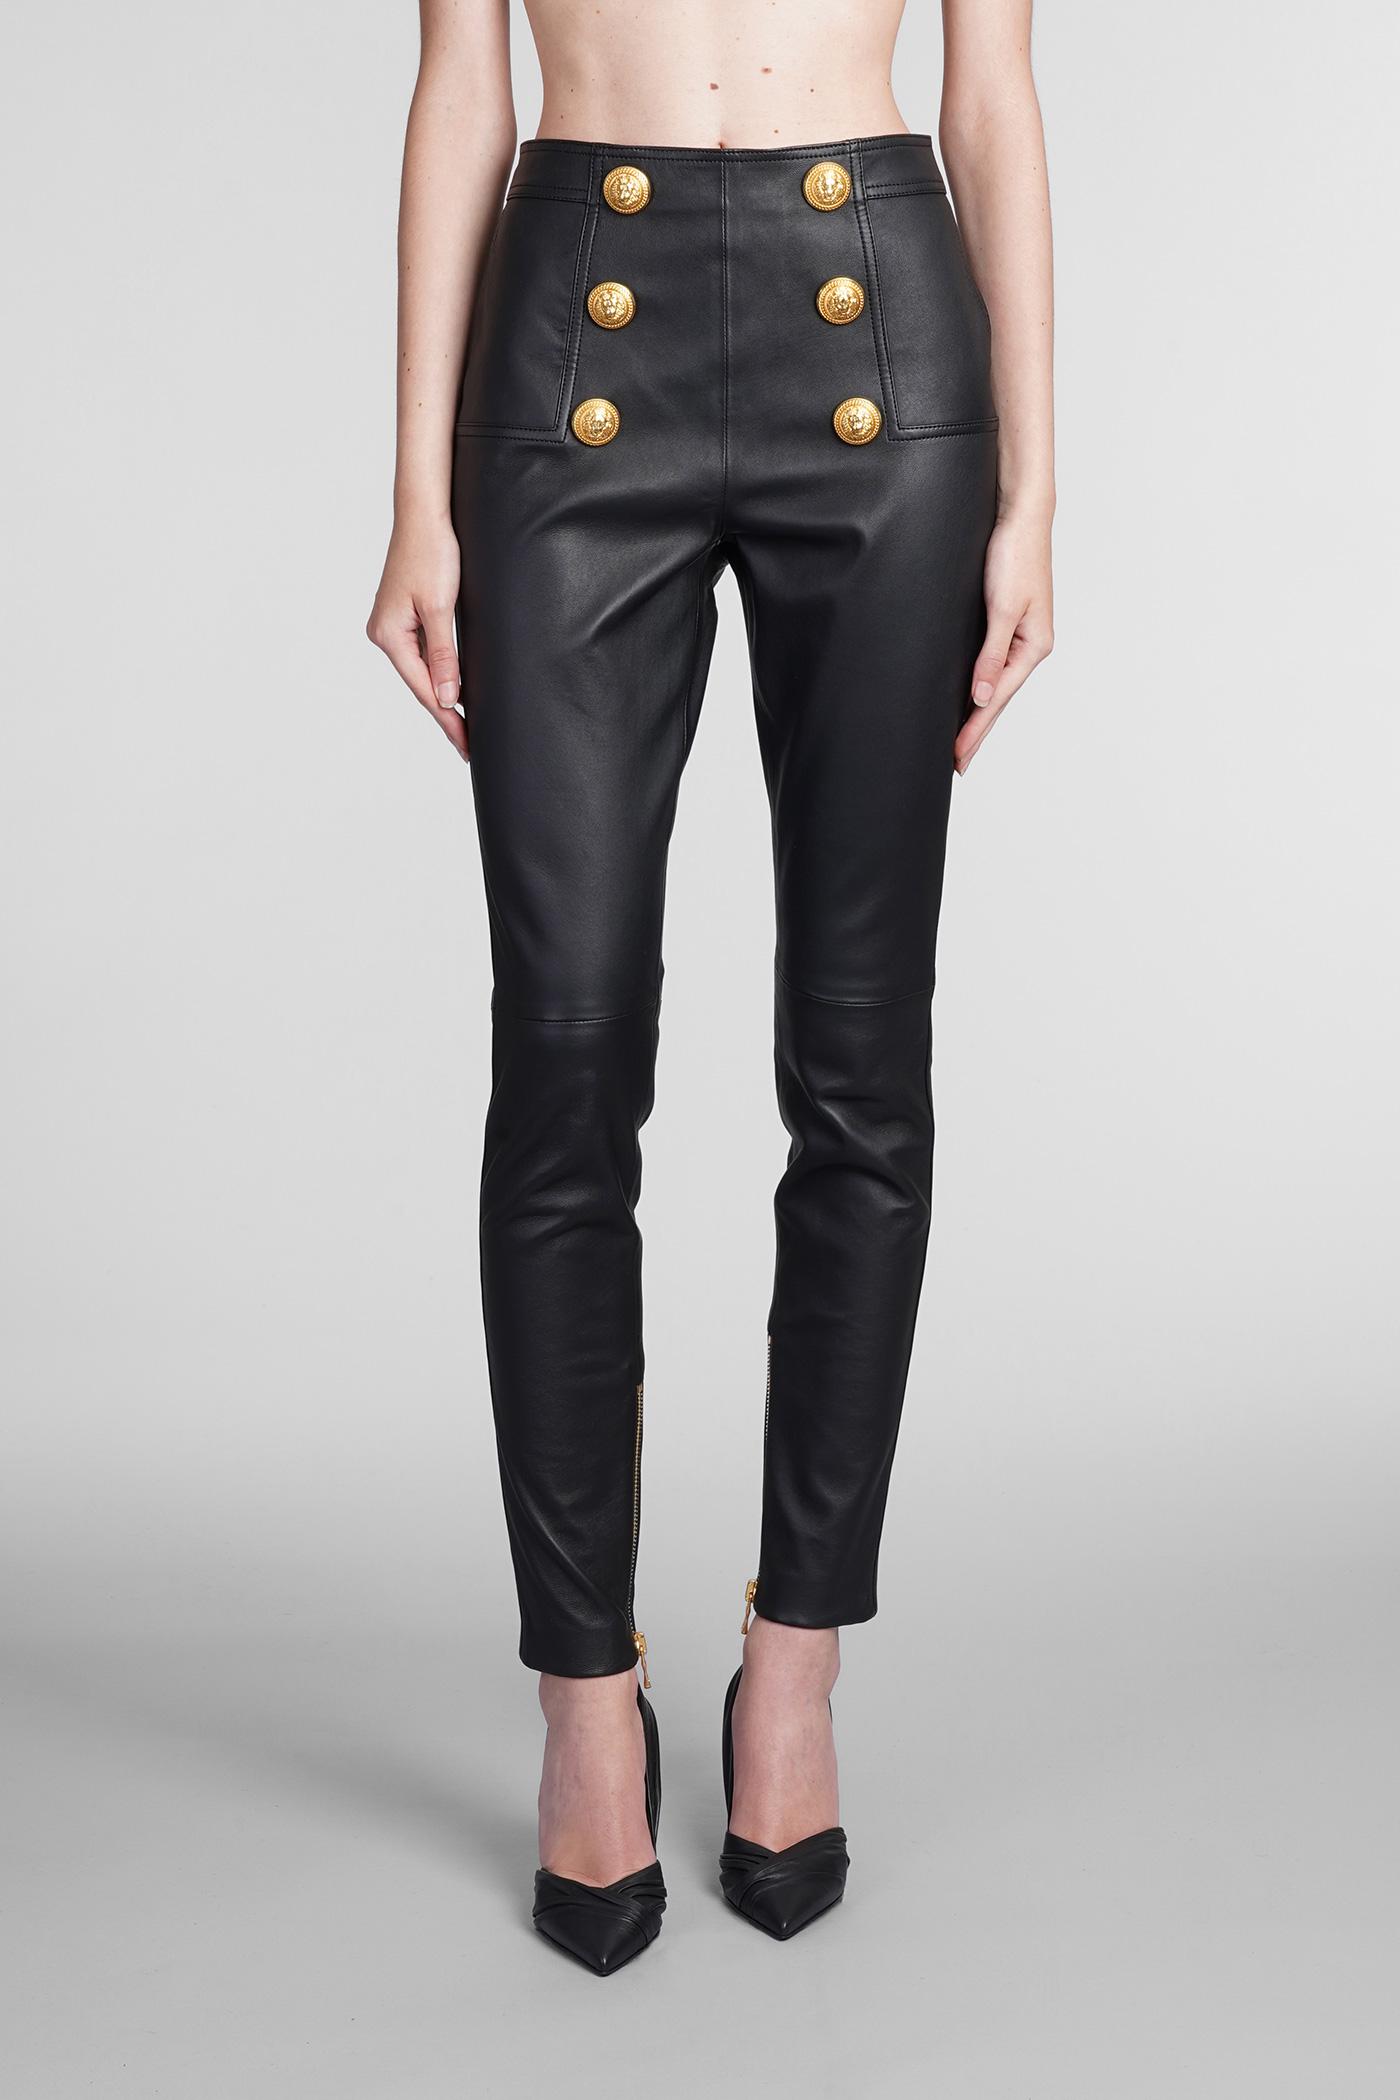 Balmain Pants In Leather in Black (Blue) - Save 50% | Lyst